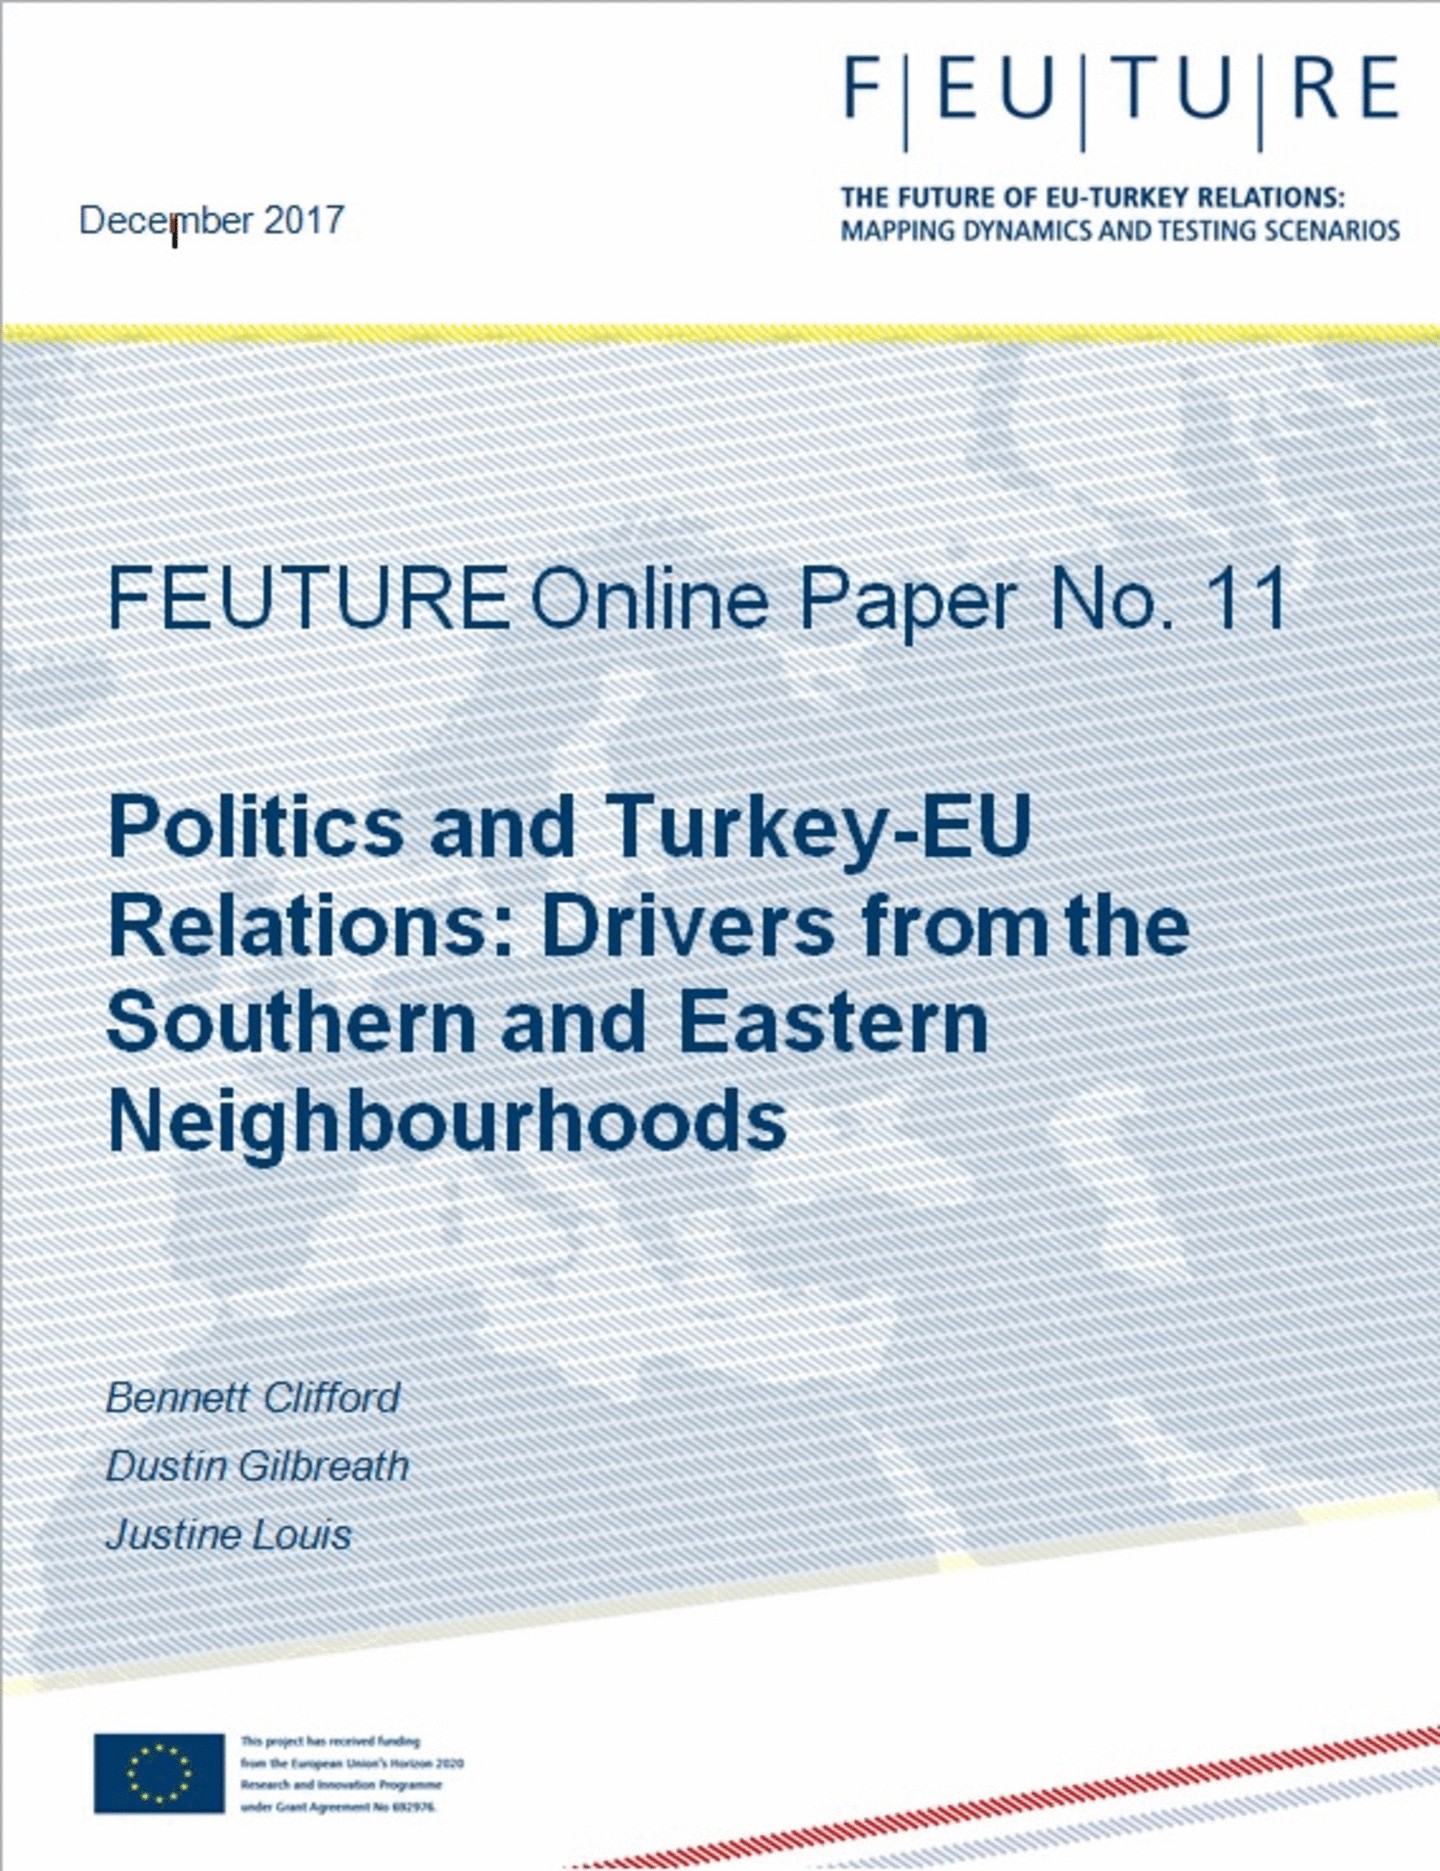 Politics and Turkey-EU Relations: Drivers from the Southern and Eastern Neighbourhoods